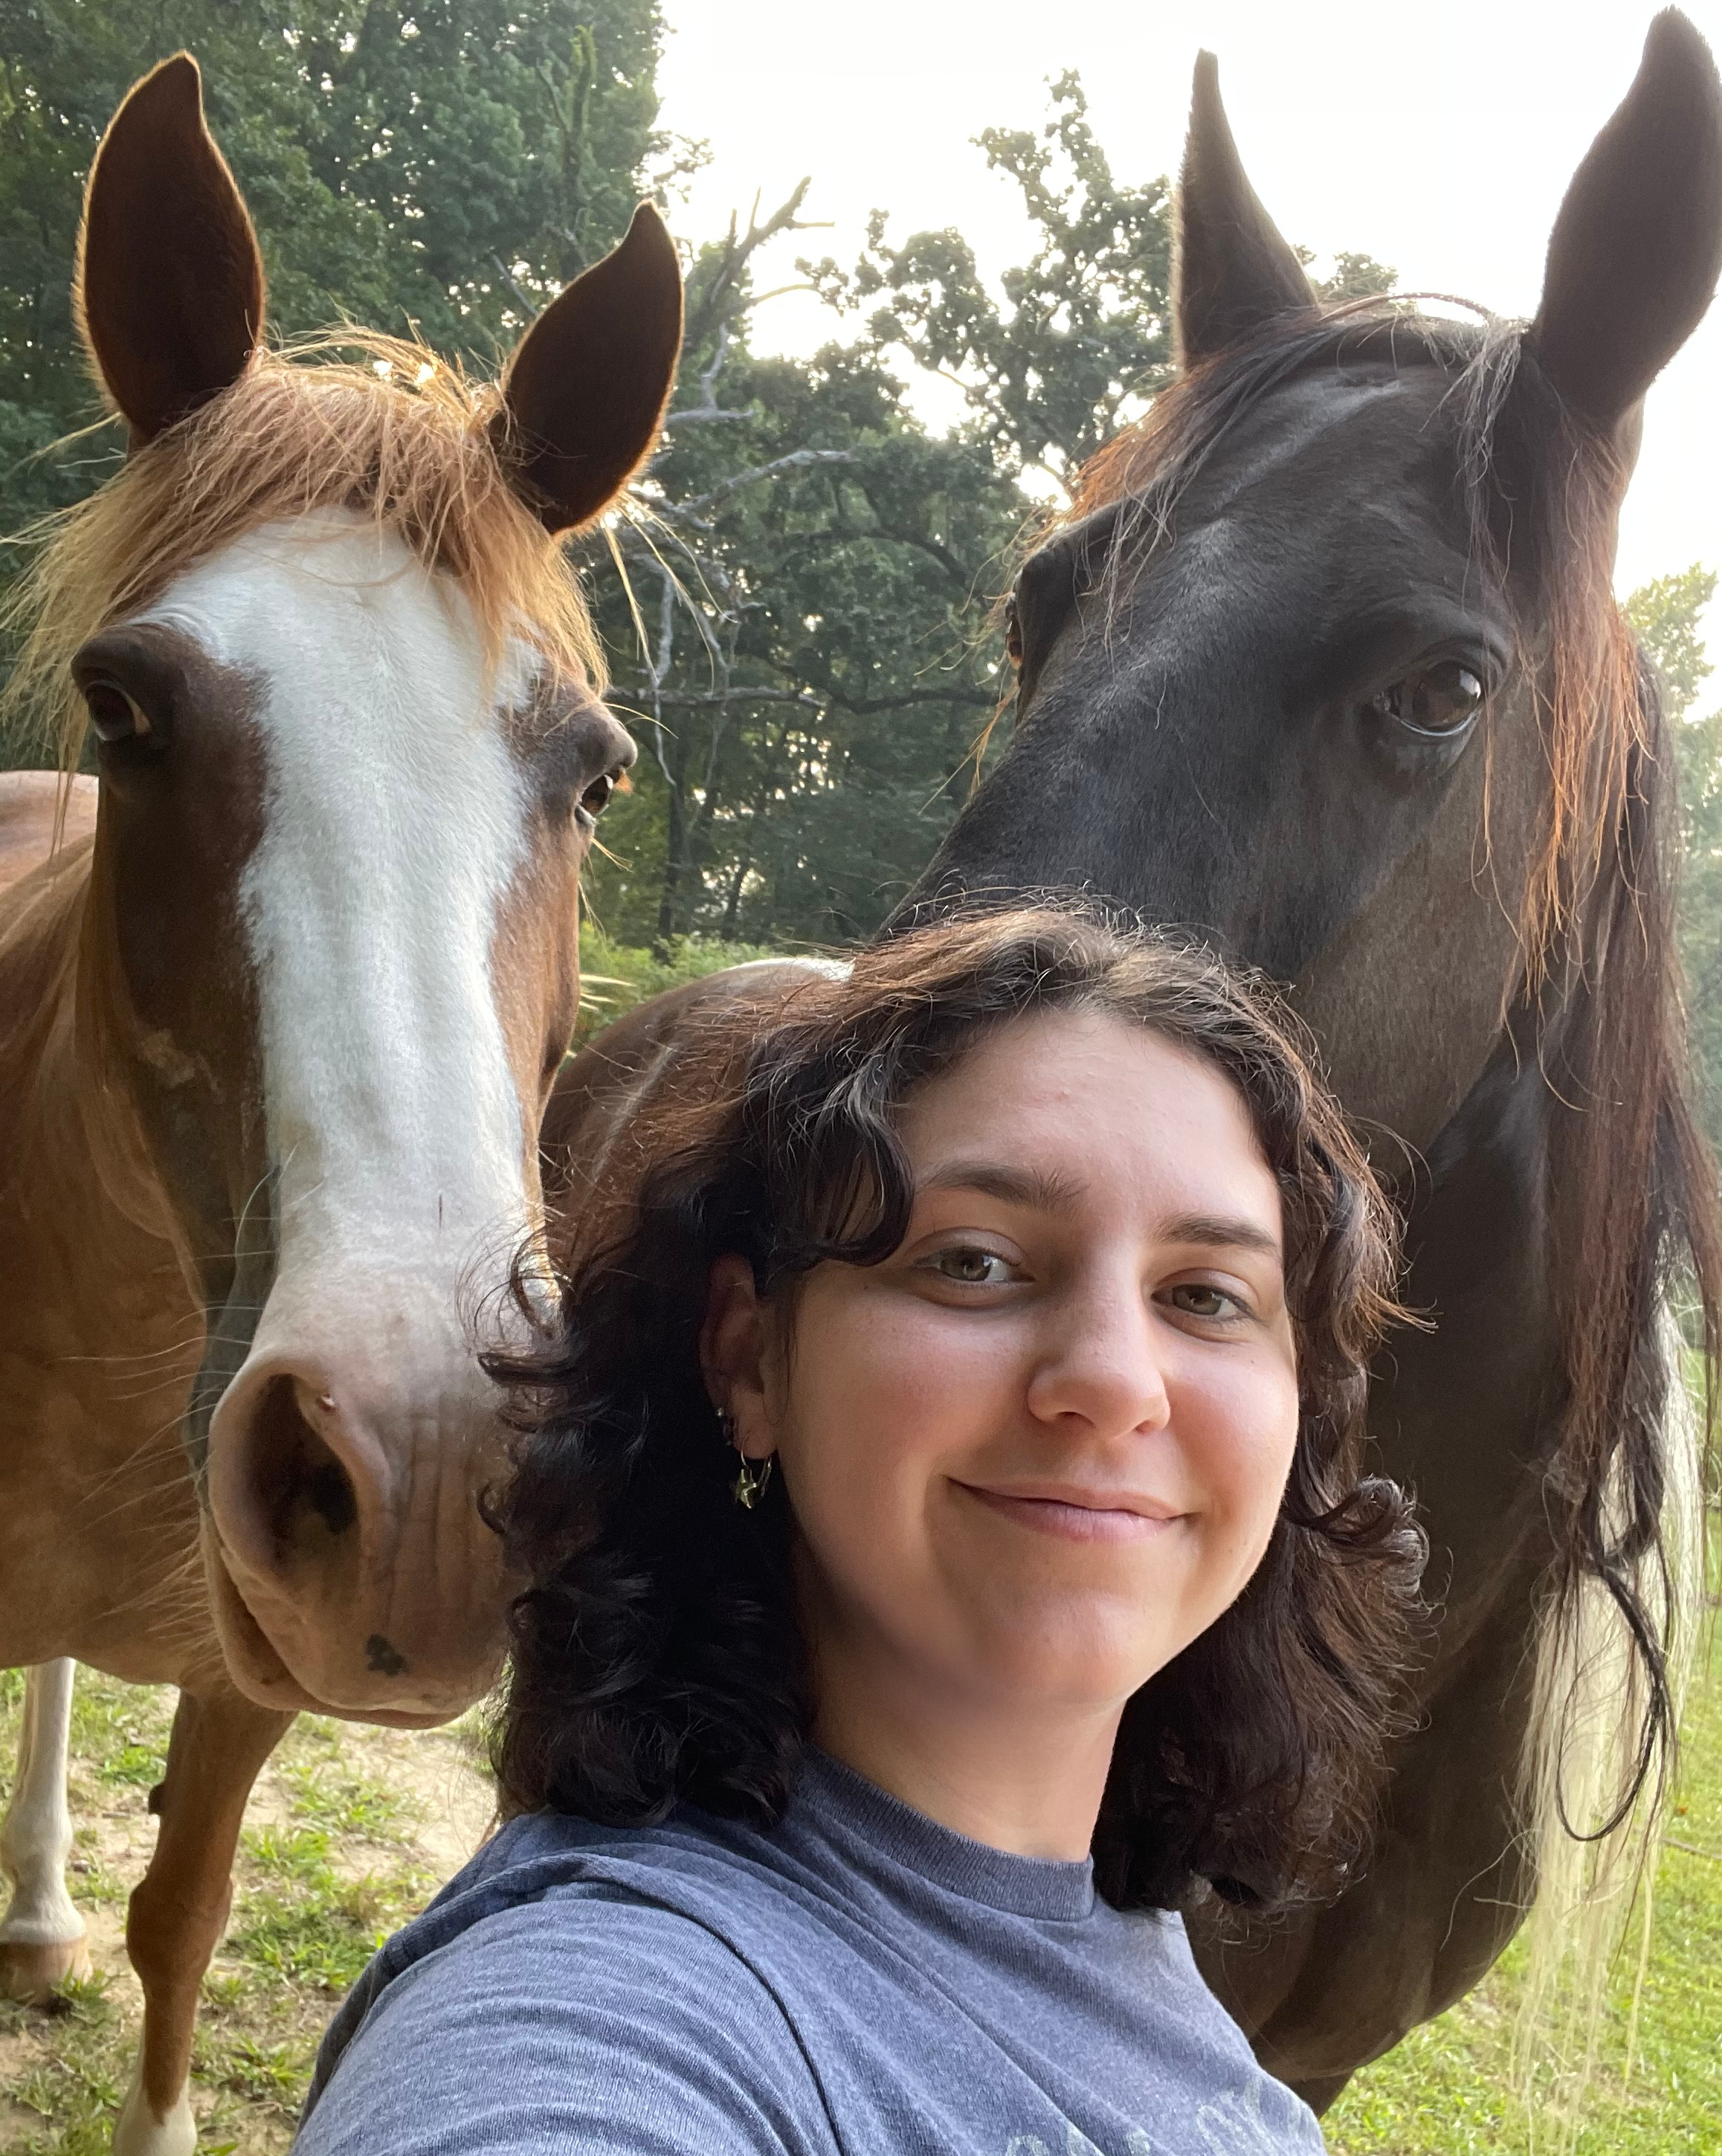 Payton takes a selfie with two horses